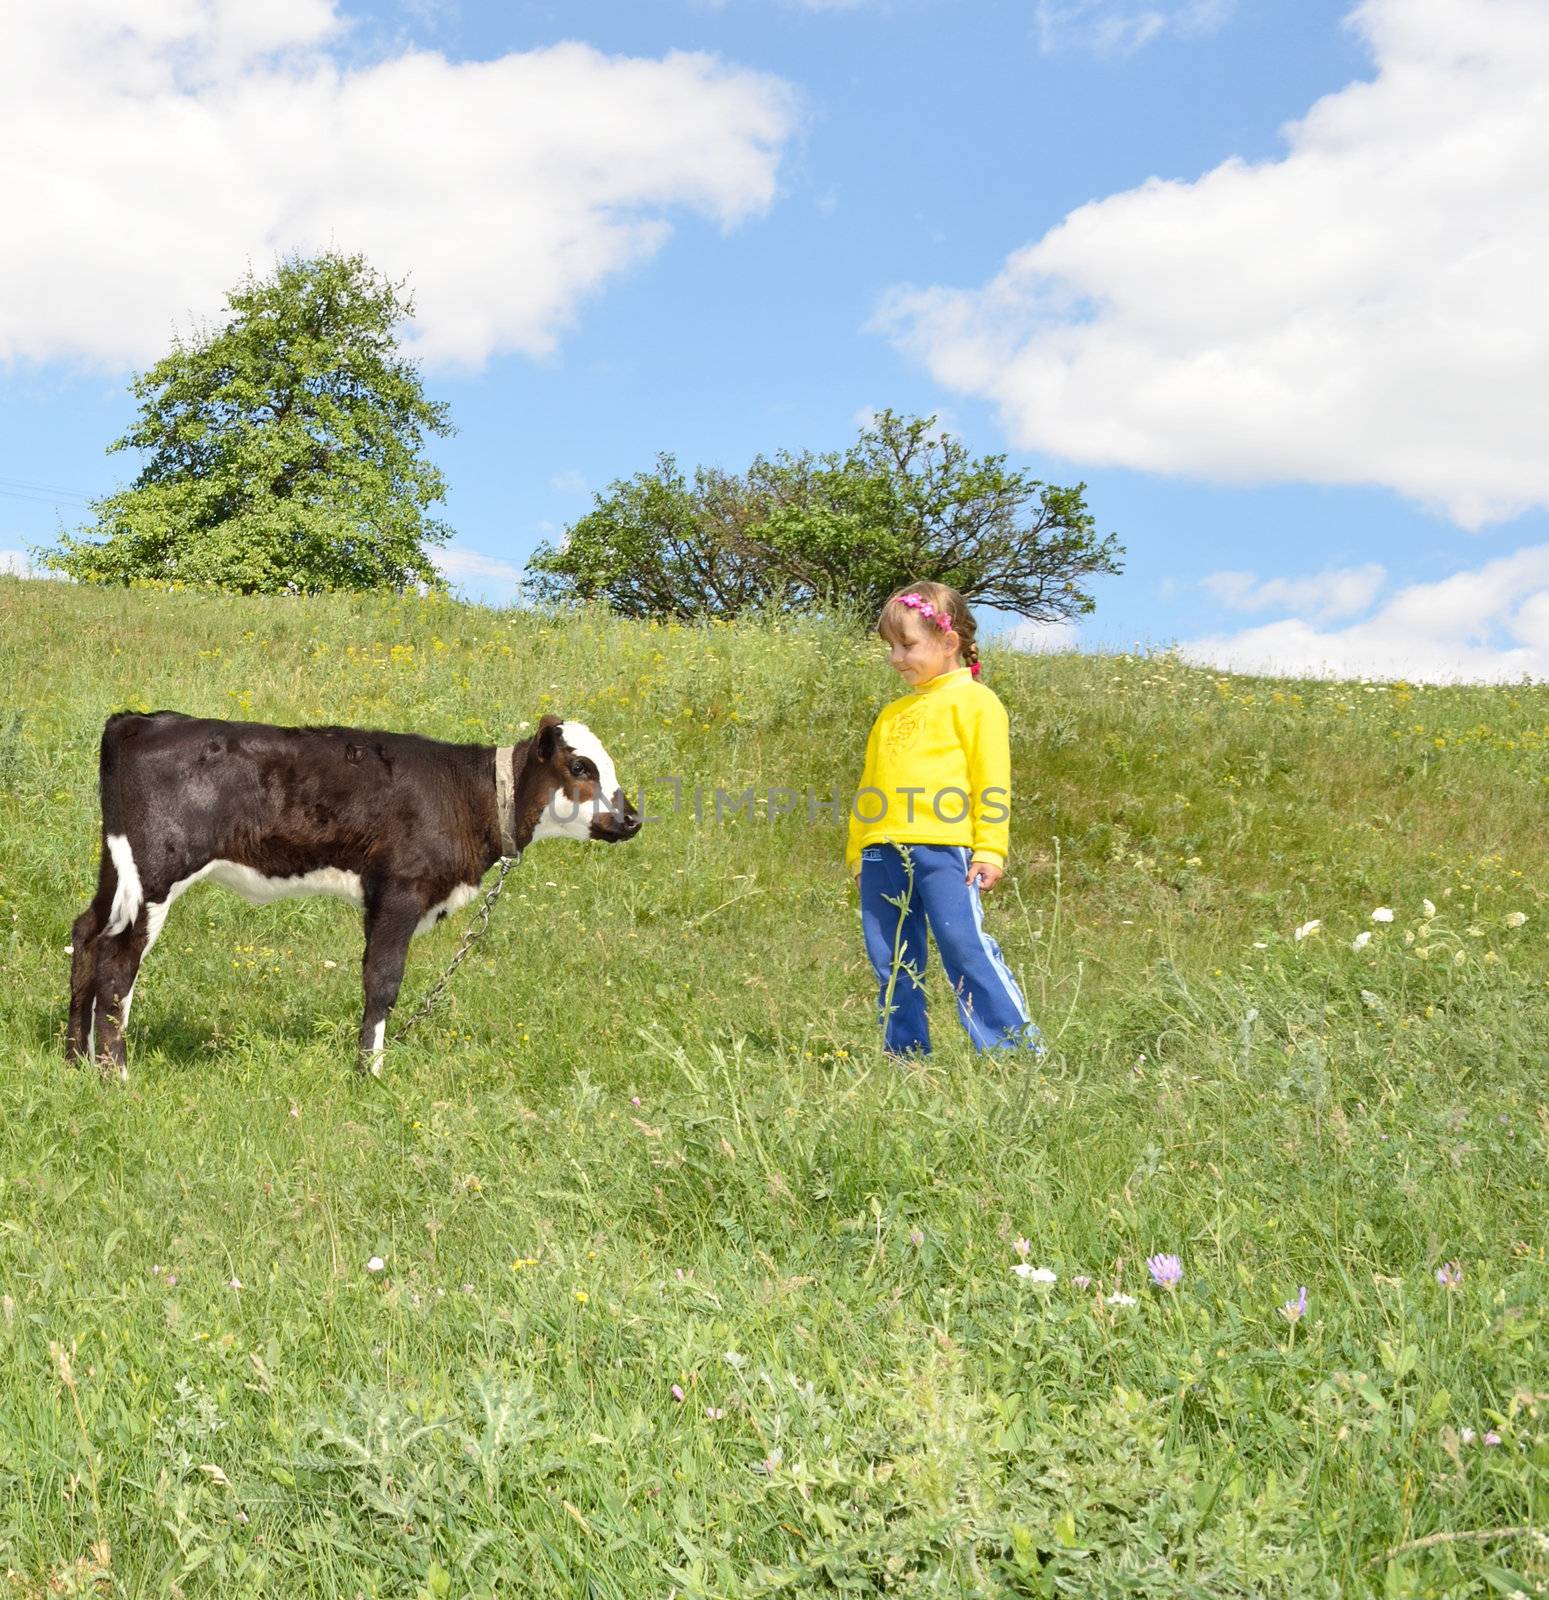 The Child and calf, on meadow. The Herb and flowerses.